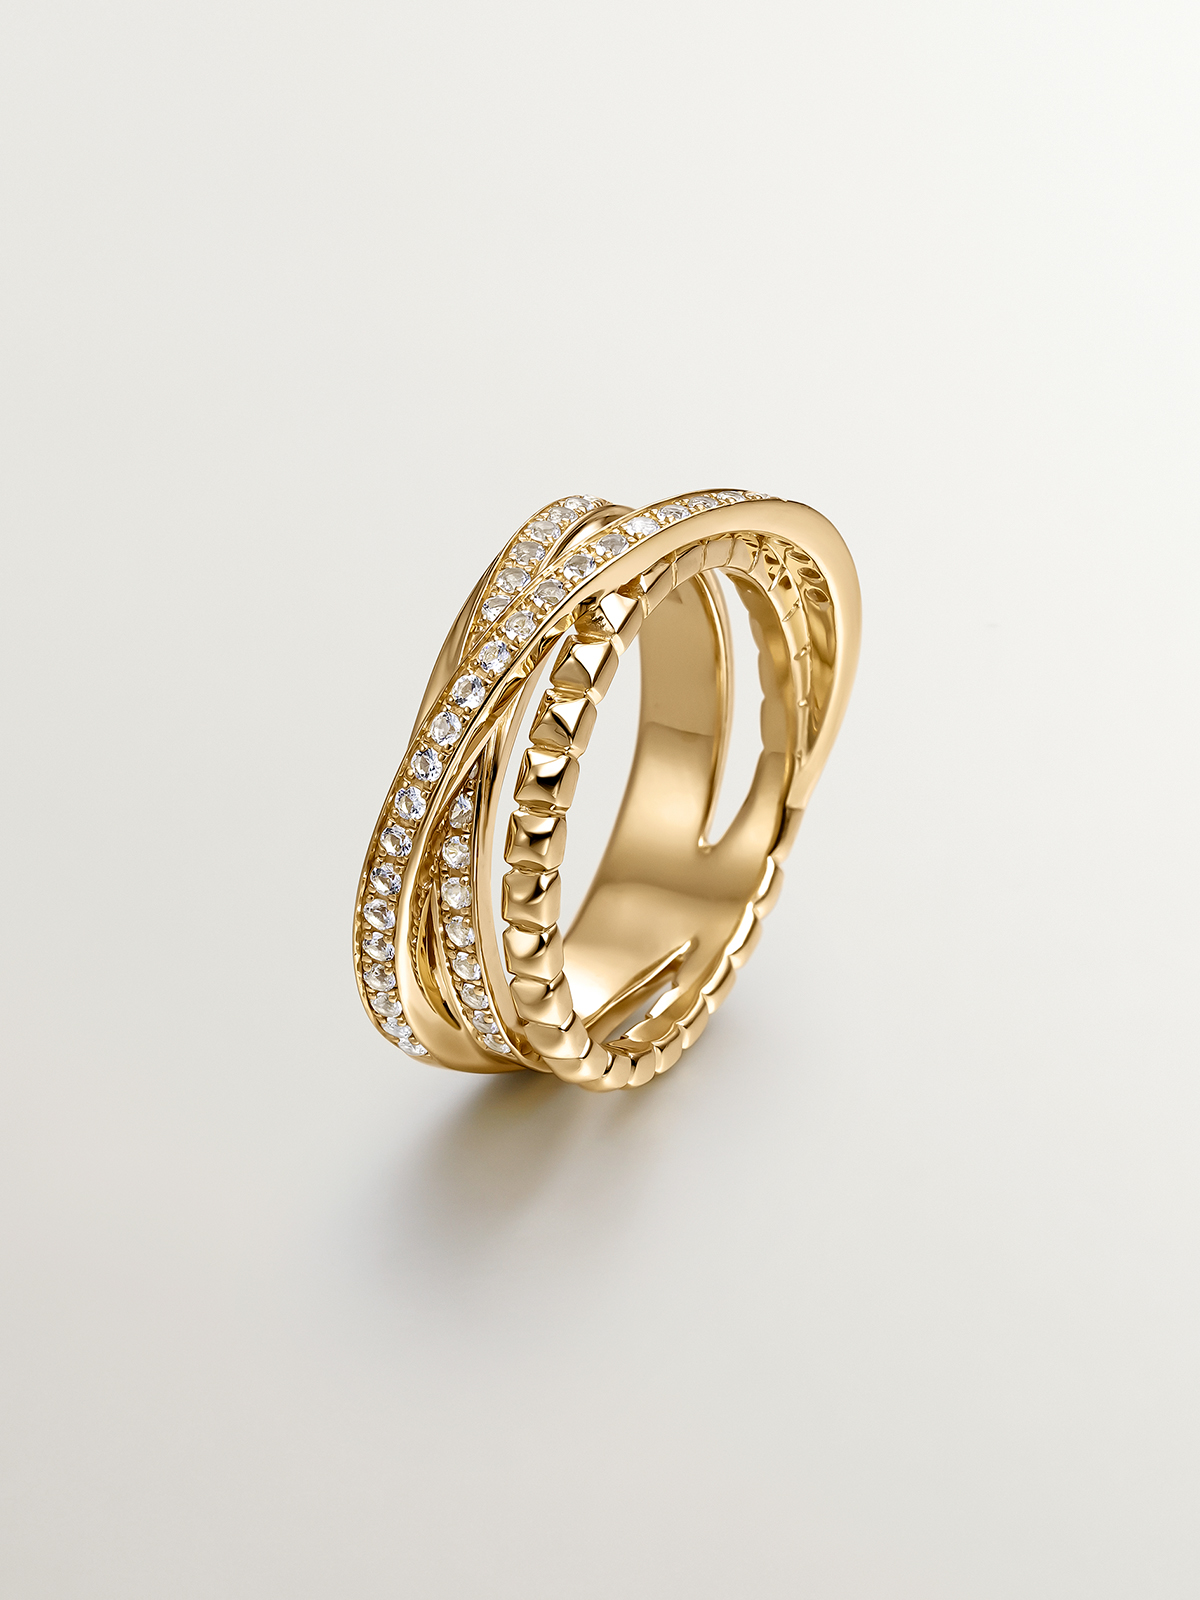 Multi-arm crossed ring of 925 silver bathed in 18K yellow gold with topazes